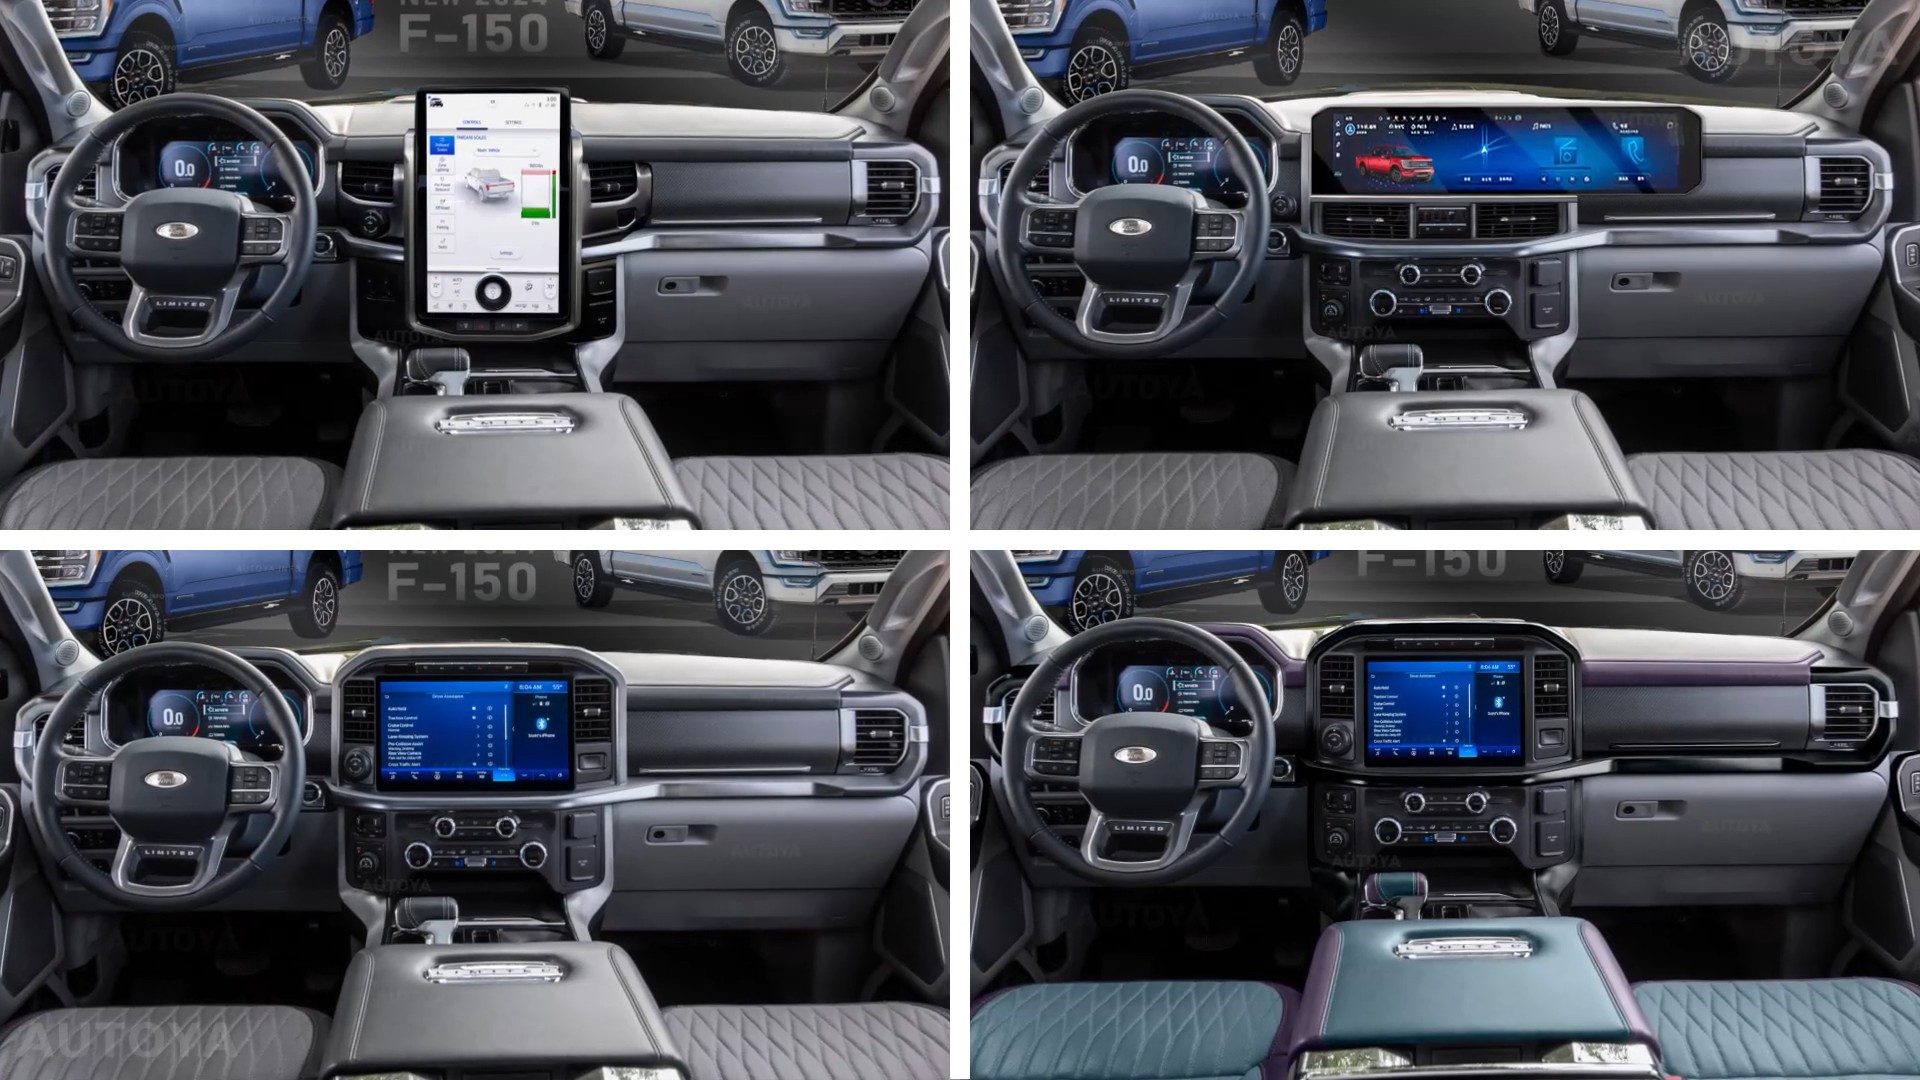 2024 Ford F 150 Truck Refresh Gets Imagined With All Possible Interior Changes 211747 1 